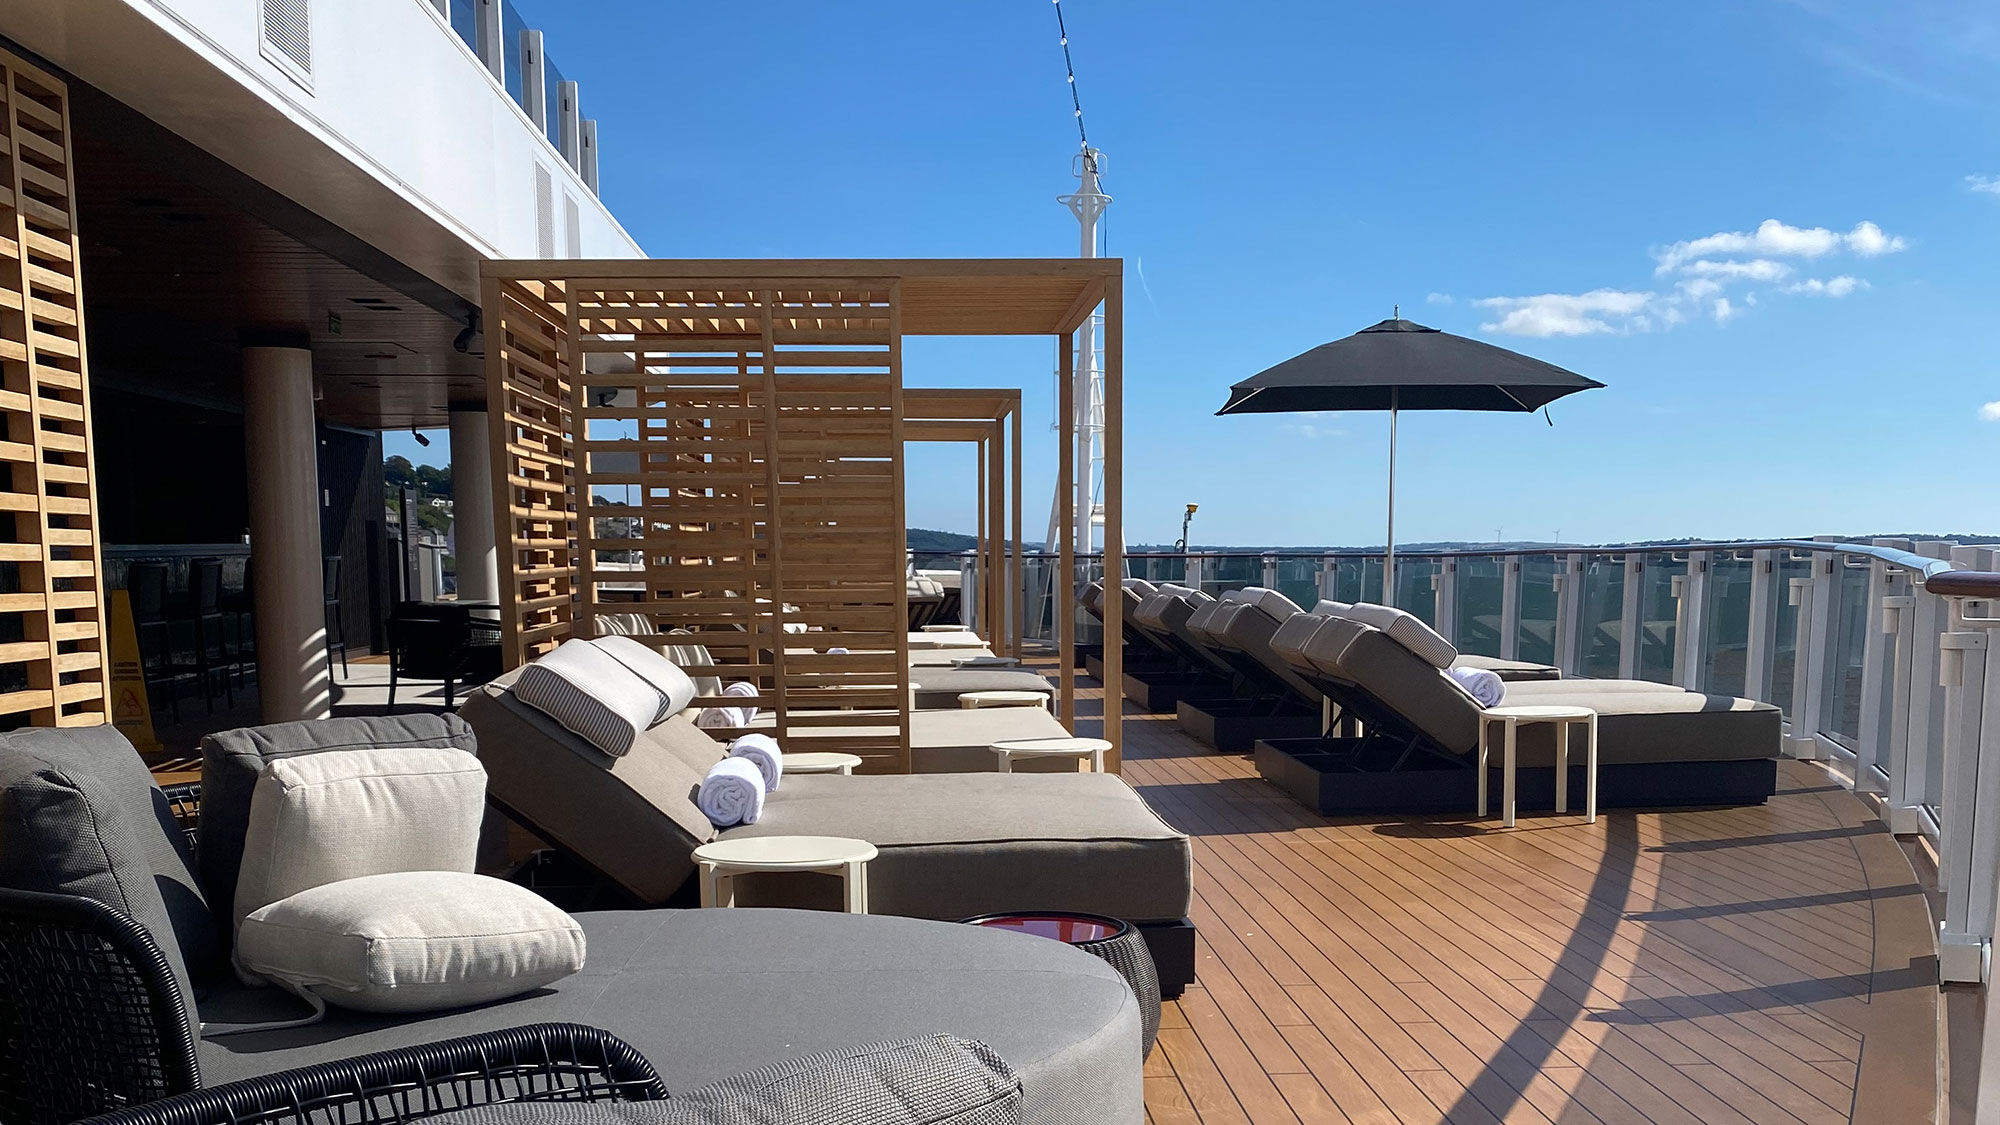 The deck of the Haven includes large day beds and an infinity pool that looks off the aft of the ship.